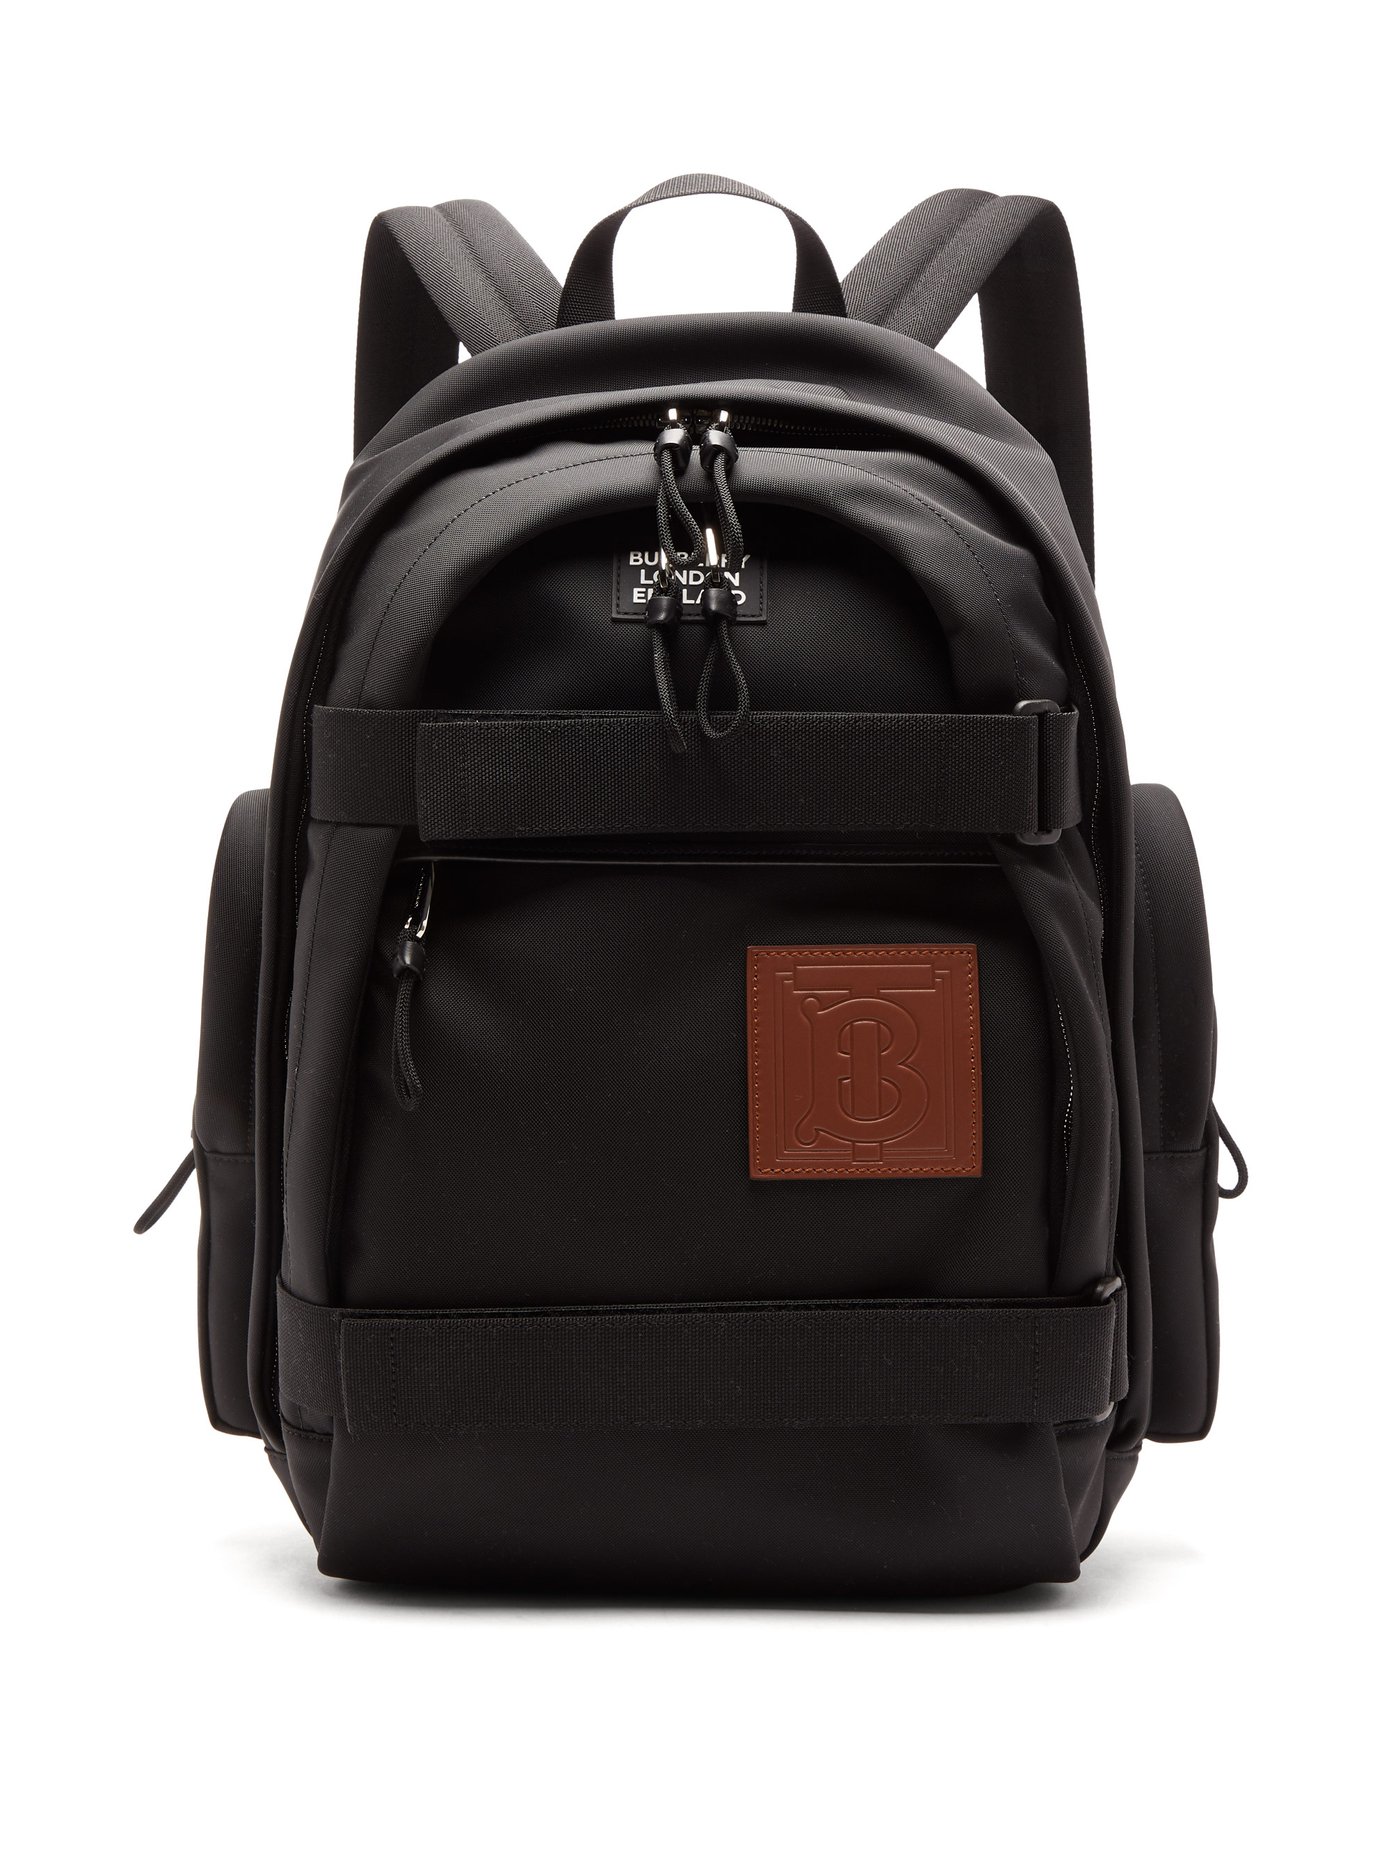 Cooper TB-patch backpack | Burberry 